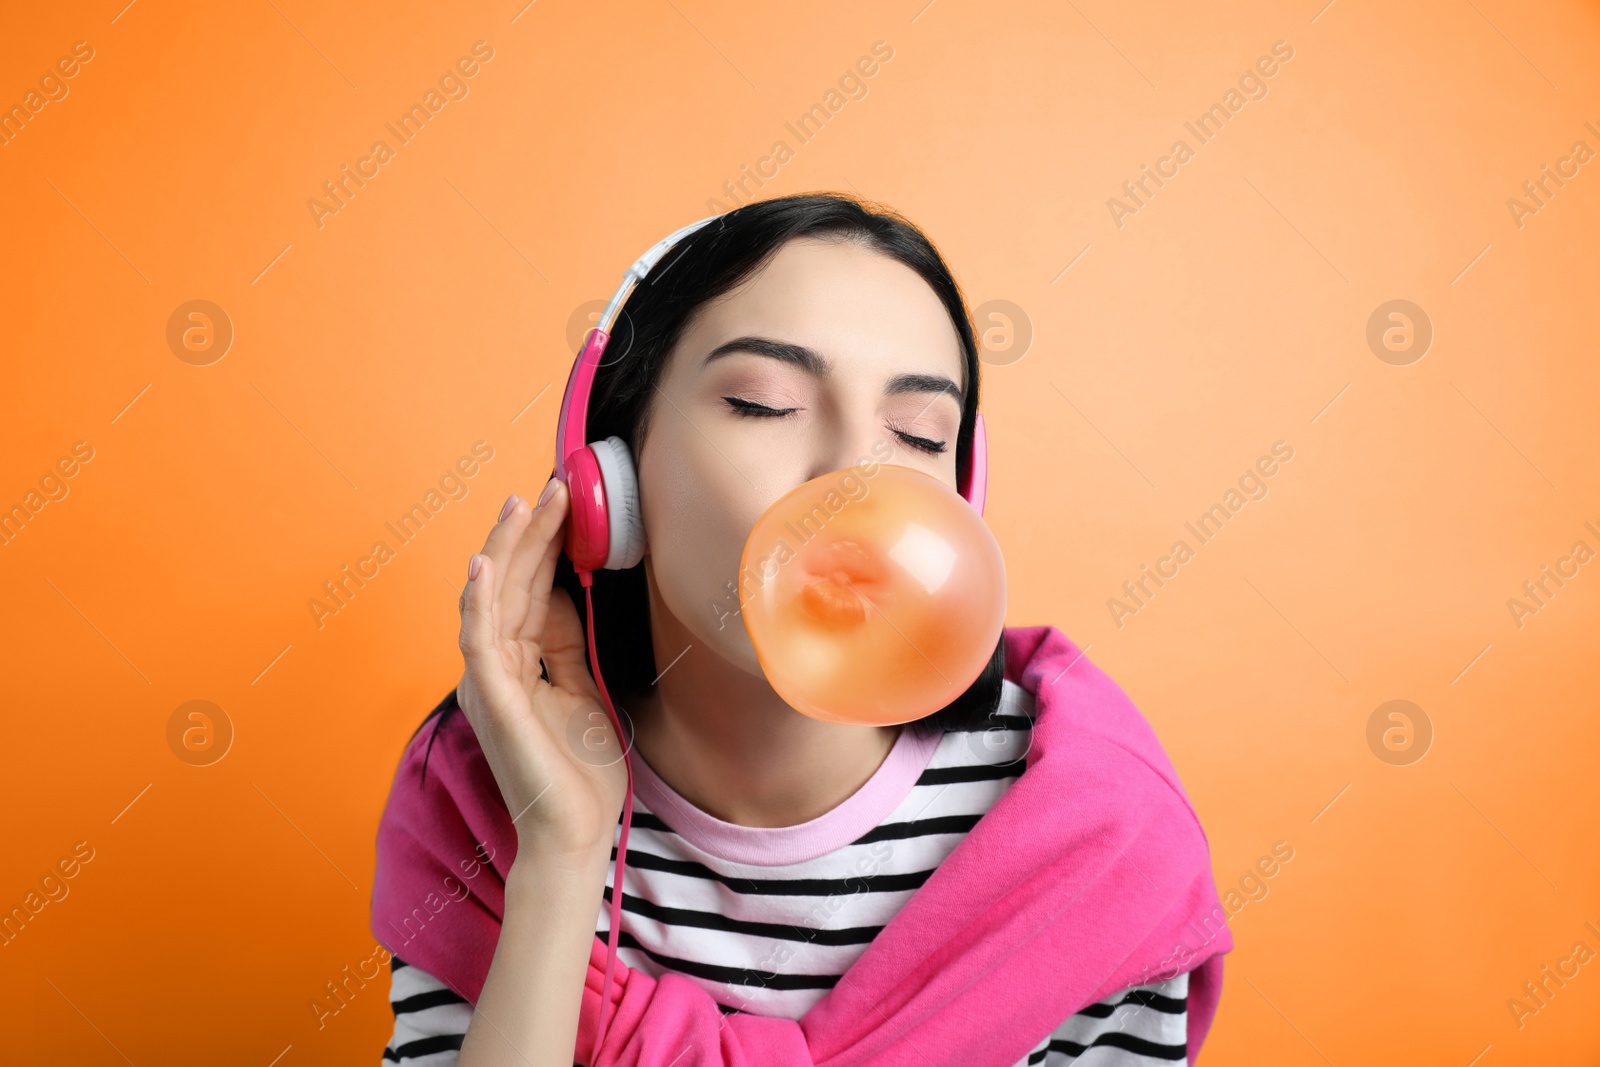 Image of Fashionable young woman with headphones blowing bubblegum on orange background